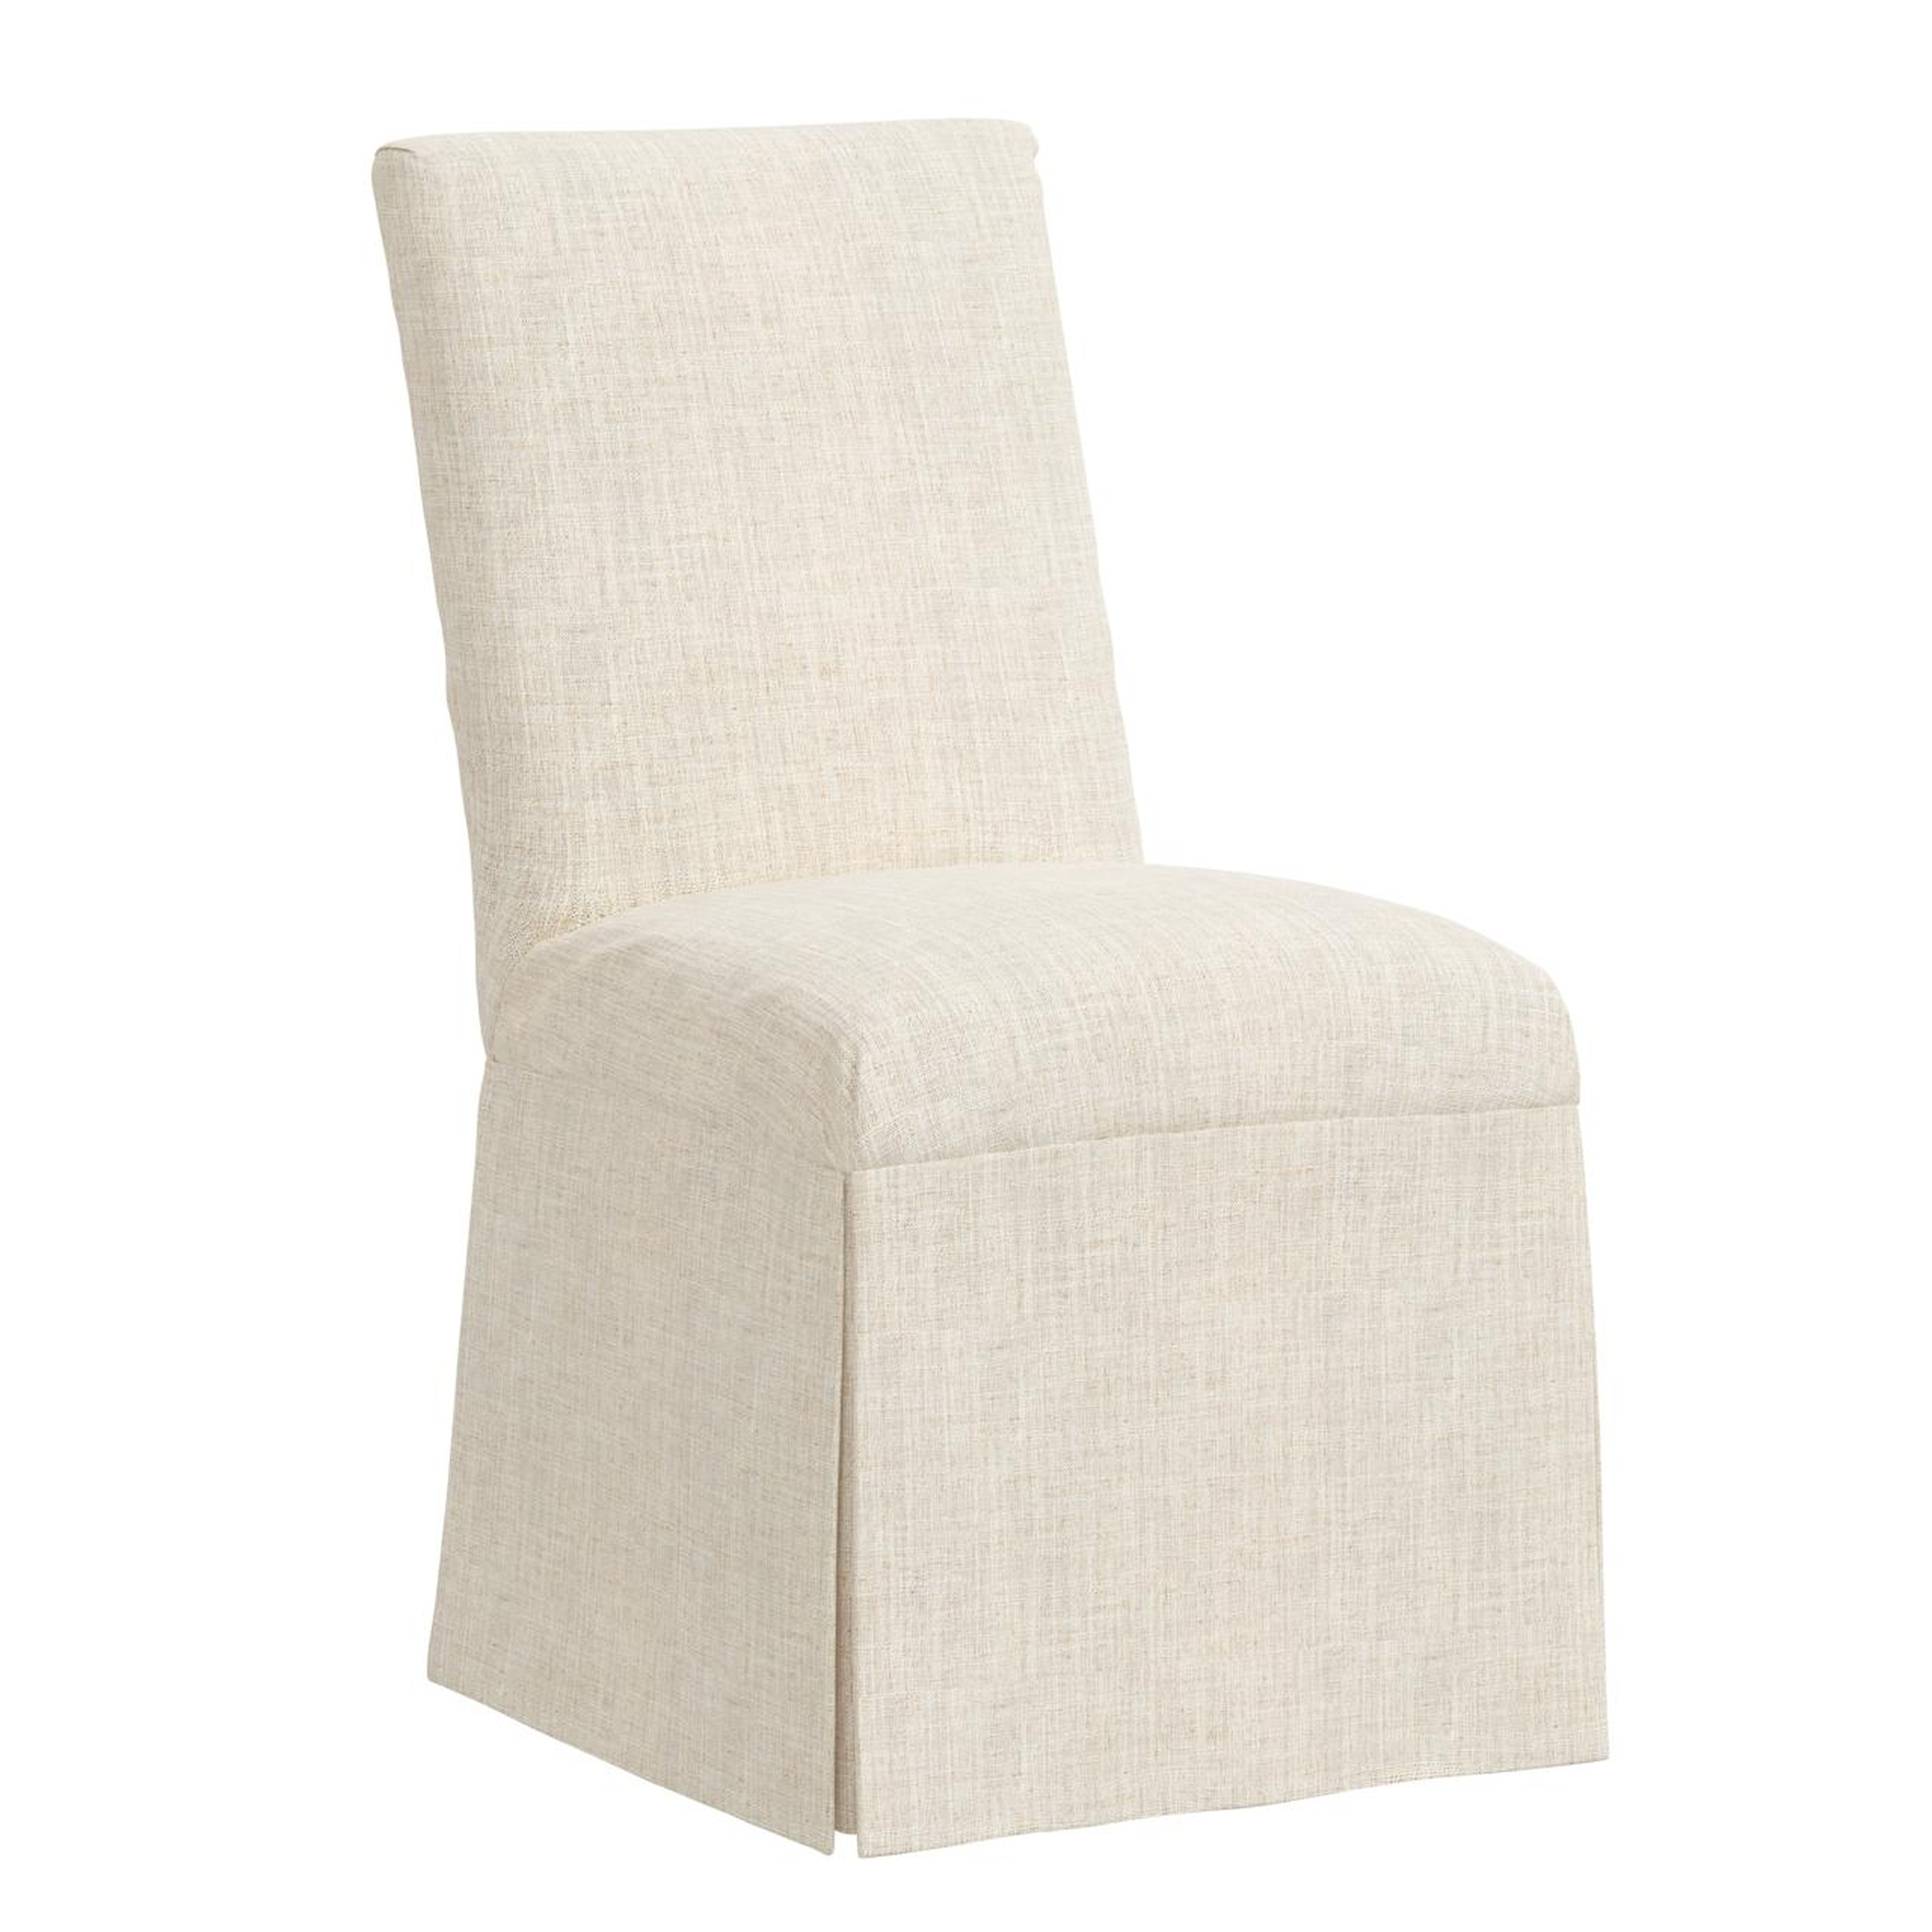 Magnolia Slipcover Dining Chair, Talc - Cove Goods